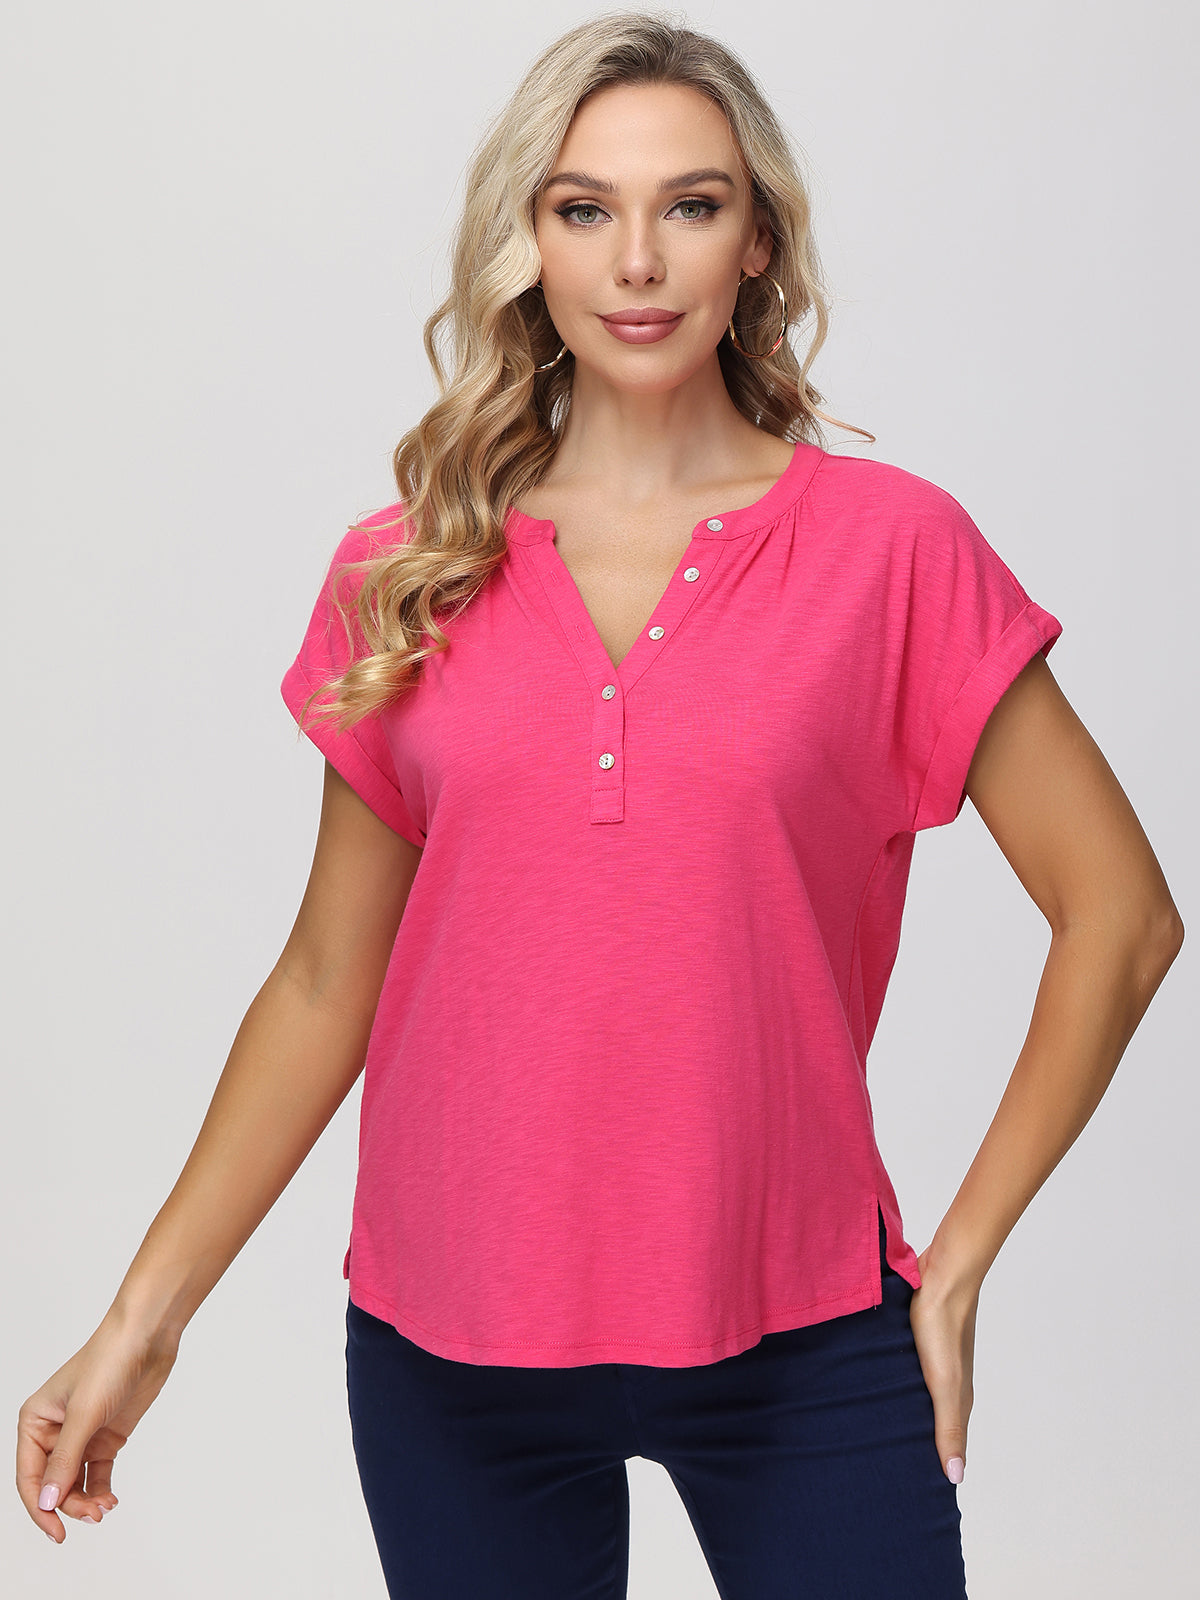 Y Neckline With Buttons Top